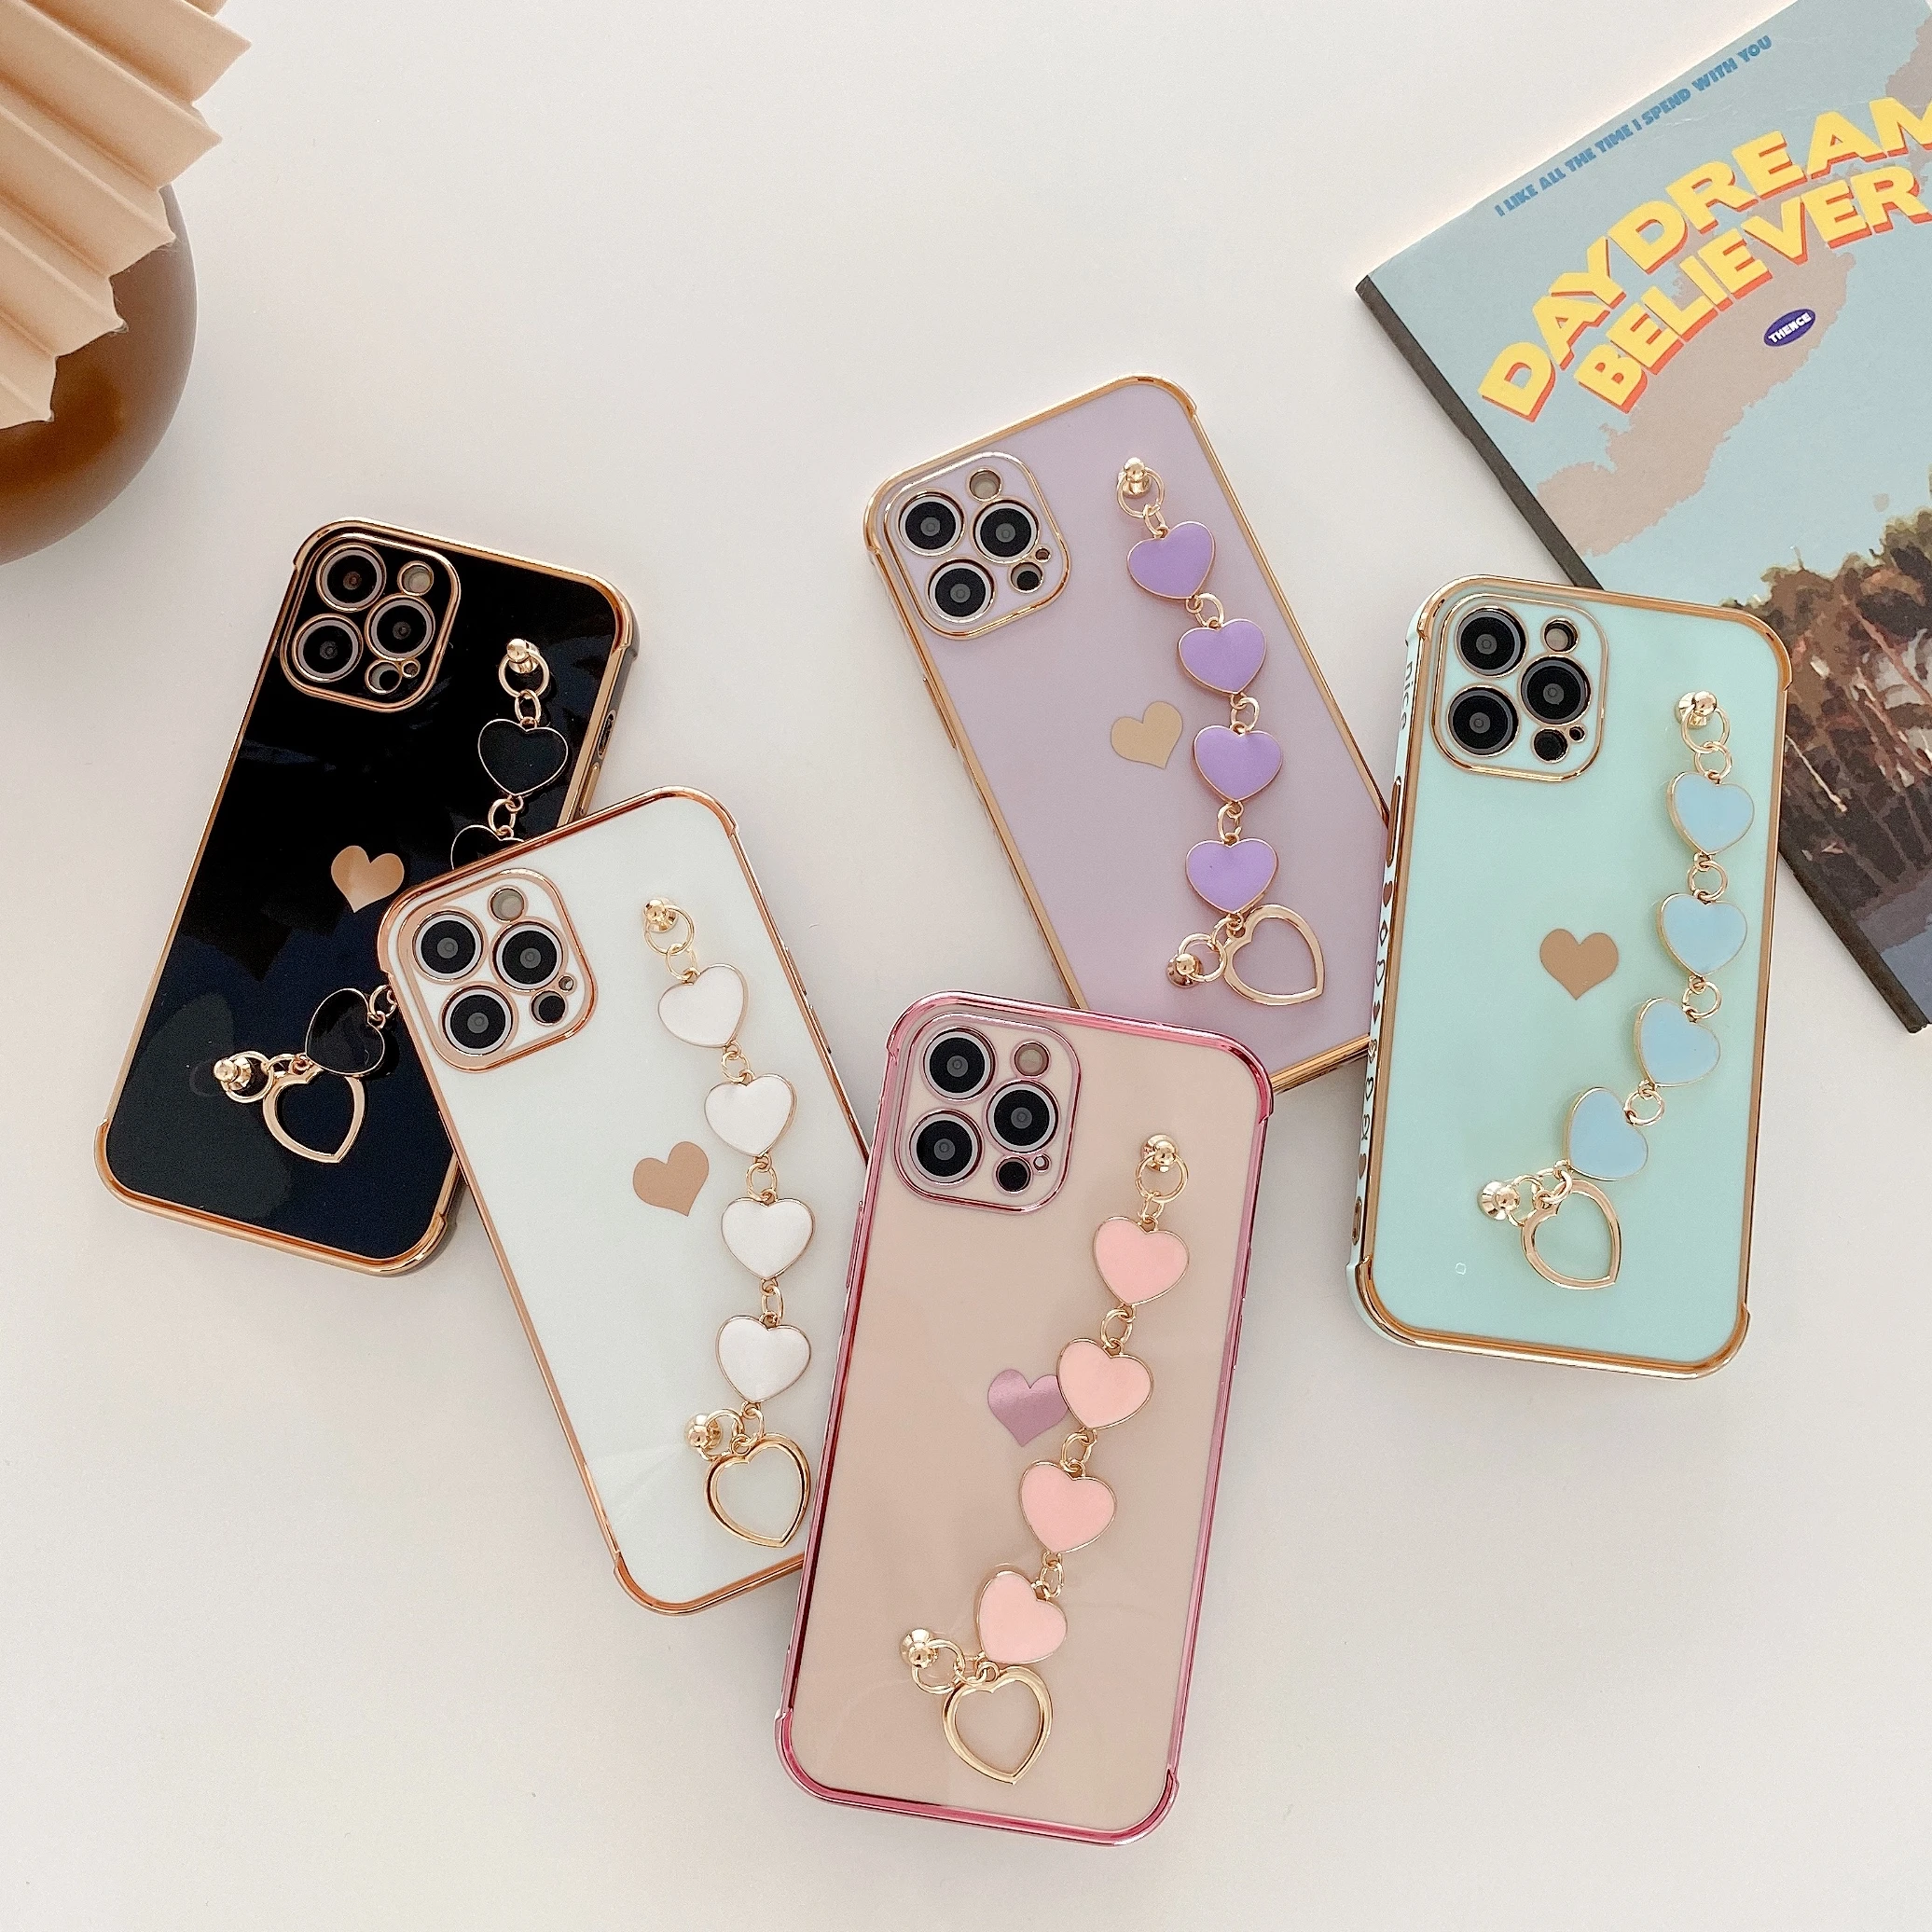 

Luxury Border Printing Electroplated Love Heart Wrist Bracelet Smart Phone Cases for iPhone 12 11 Pro Max XS XR Cover For Girls